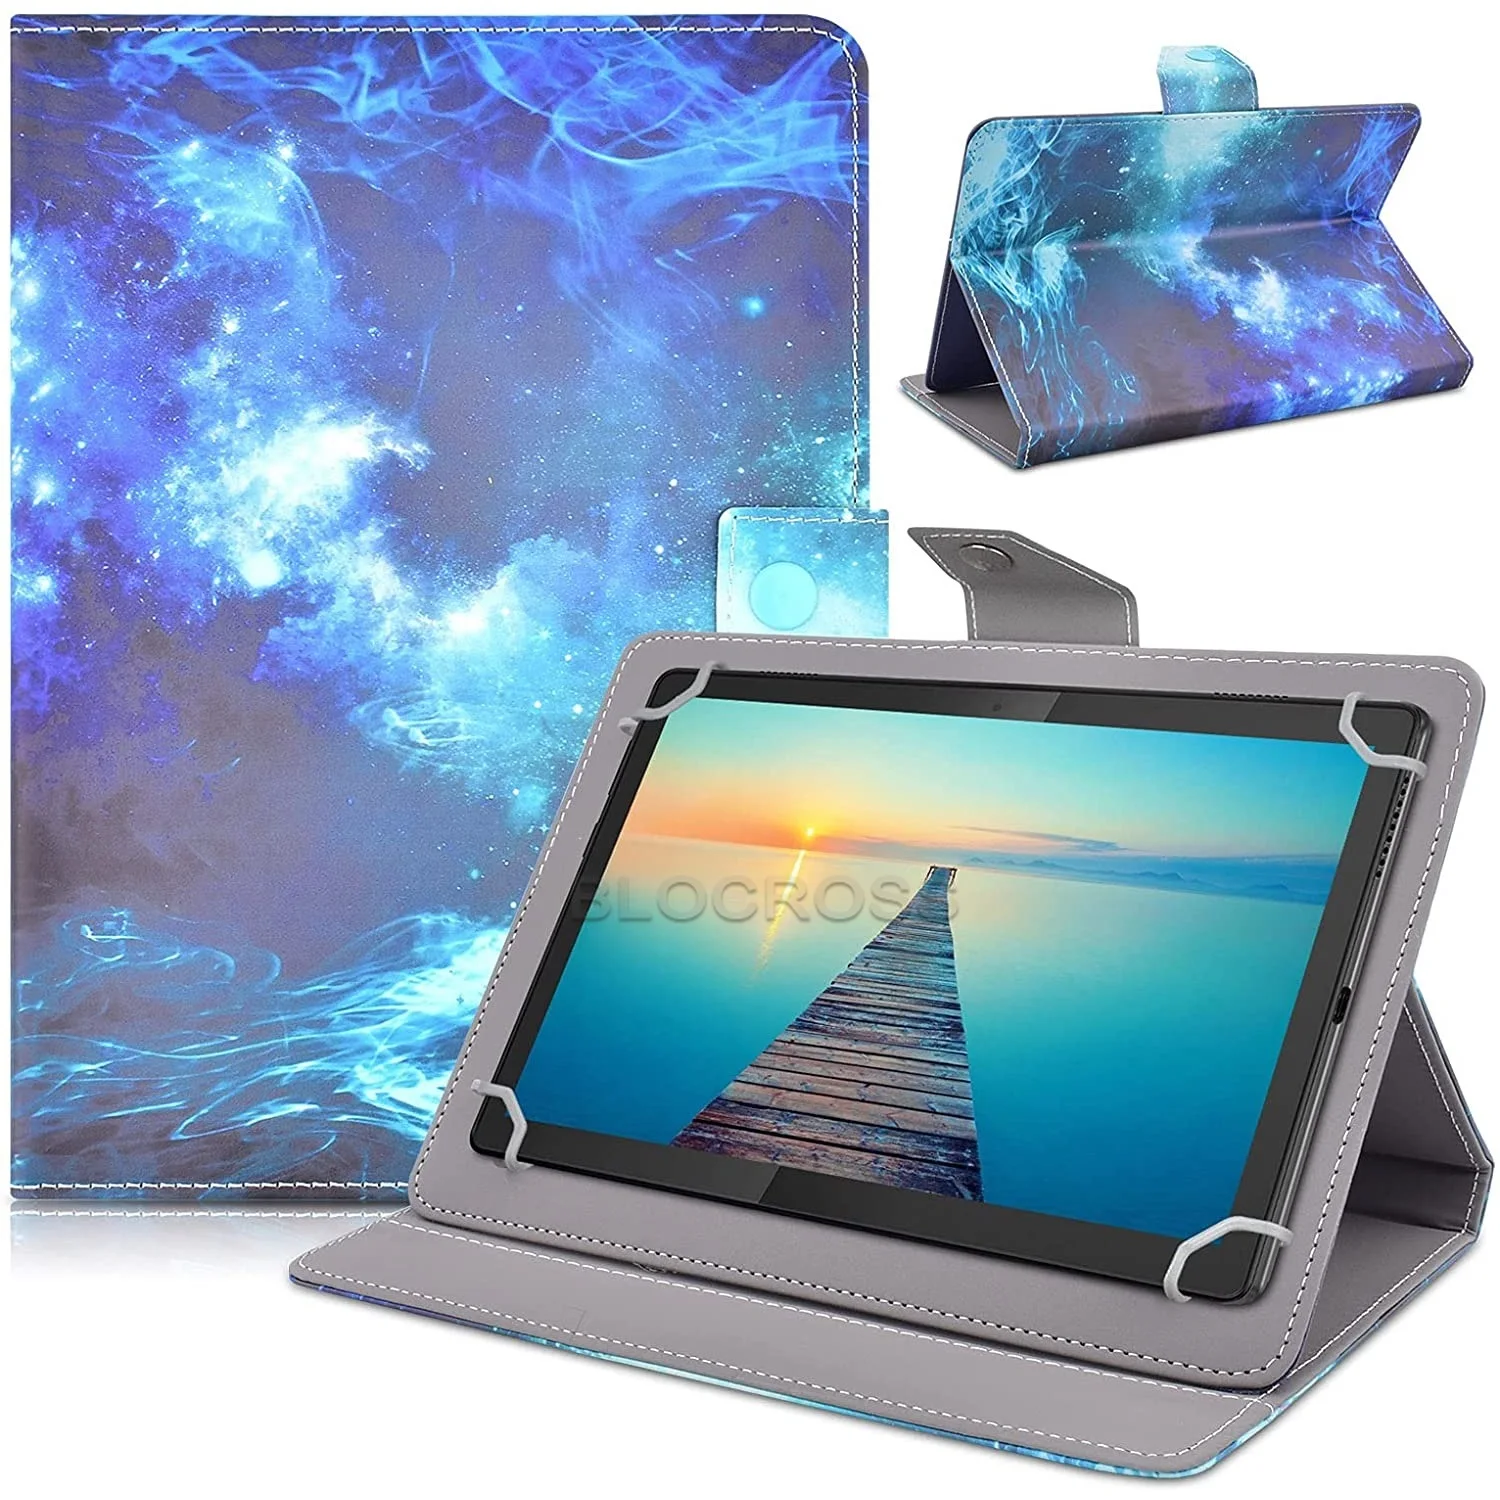 Universal Case for 9.5"-10.5" Tablet Folio Cover Case for All Fire HD 10 iPad 9.7 and More 9.6"9.7"10.1''10.5"Android iOS Tablet